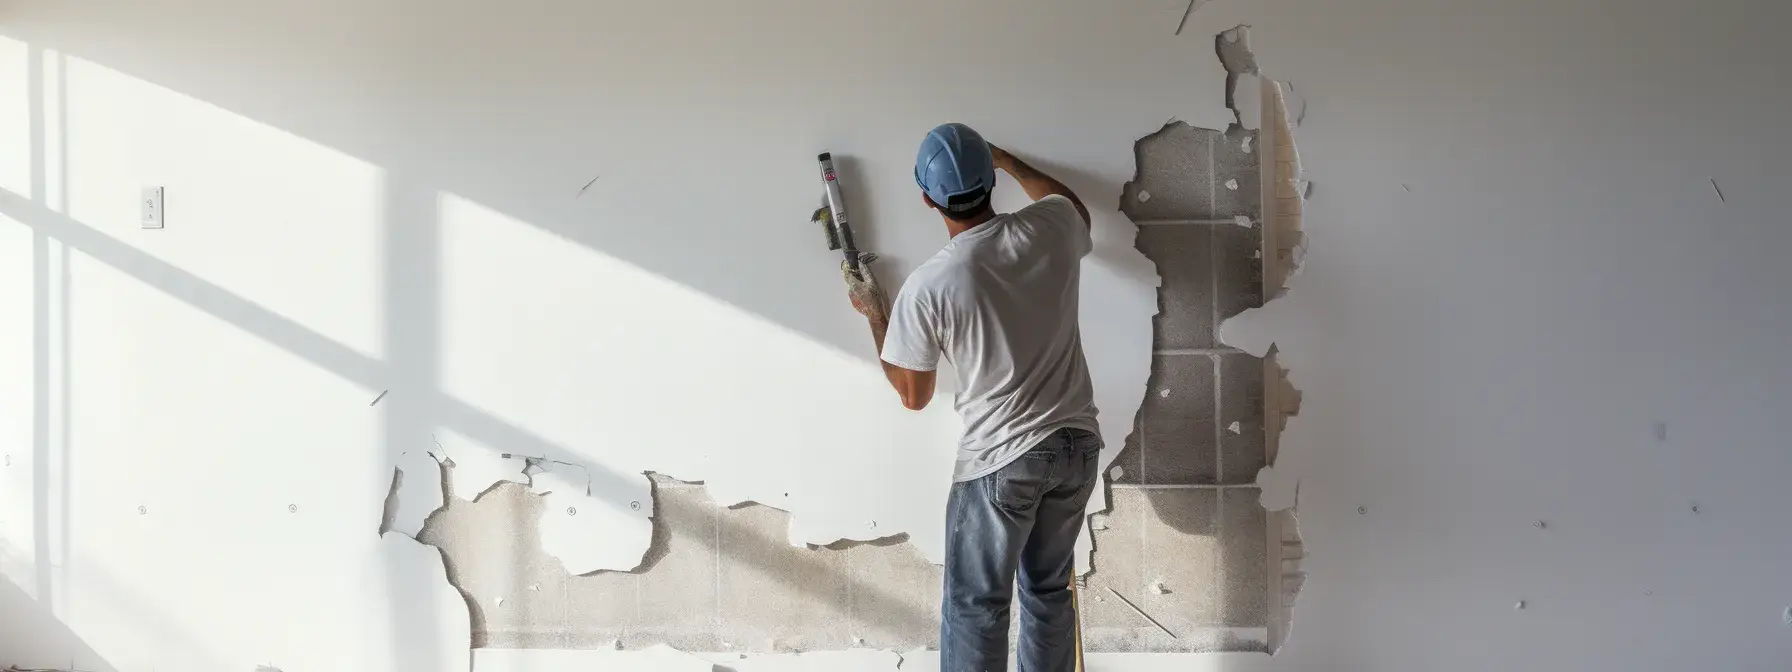 a person learning drywall repair skills by studying a repair manual and practicing on a damaged wall.